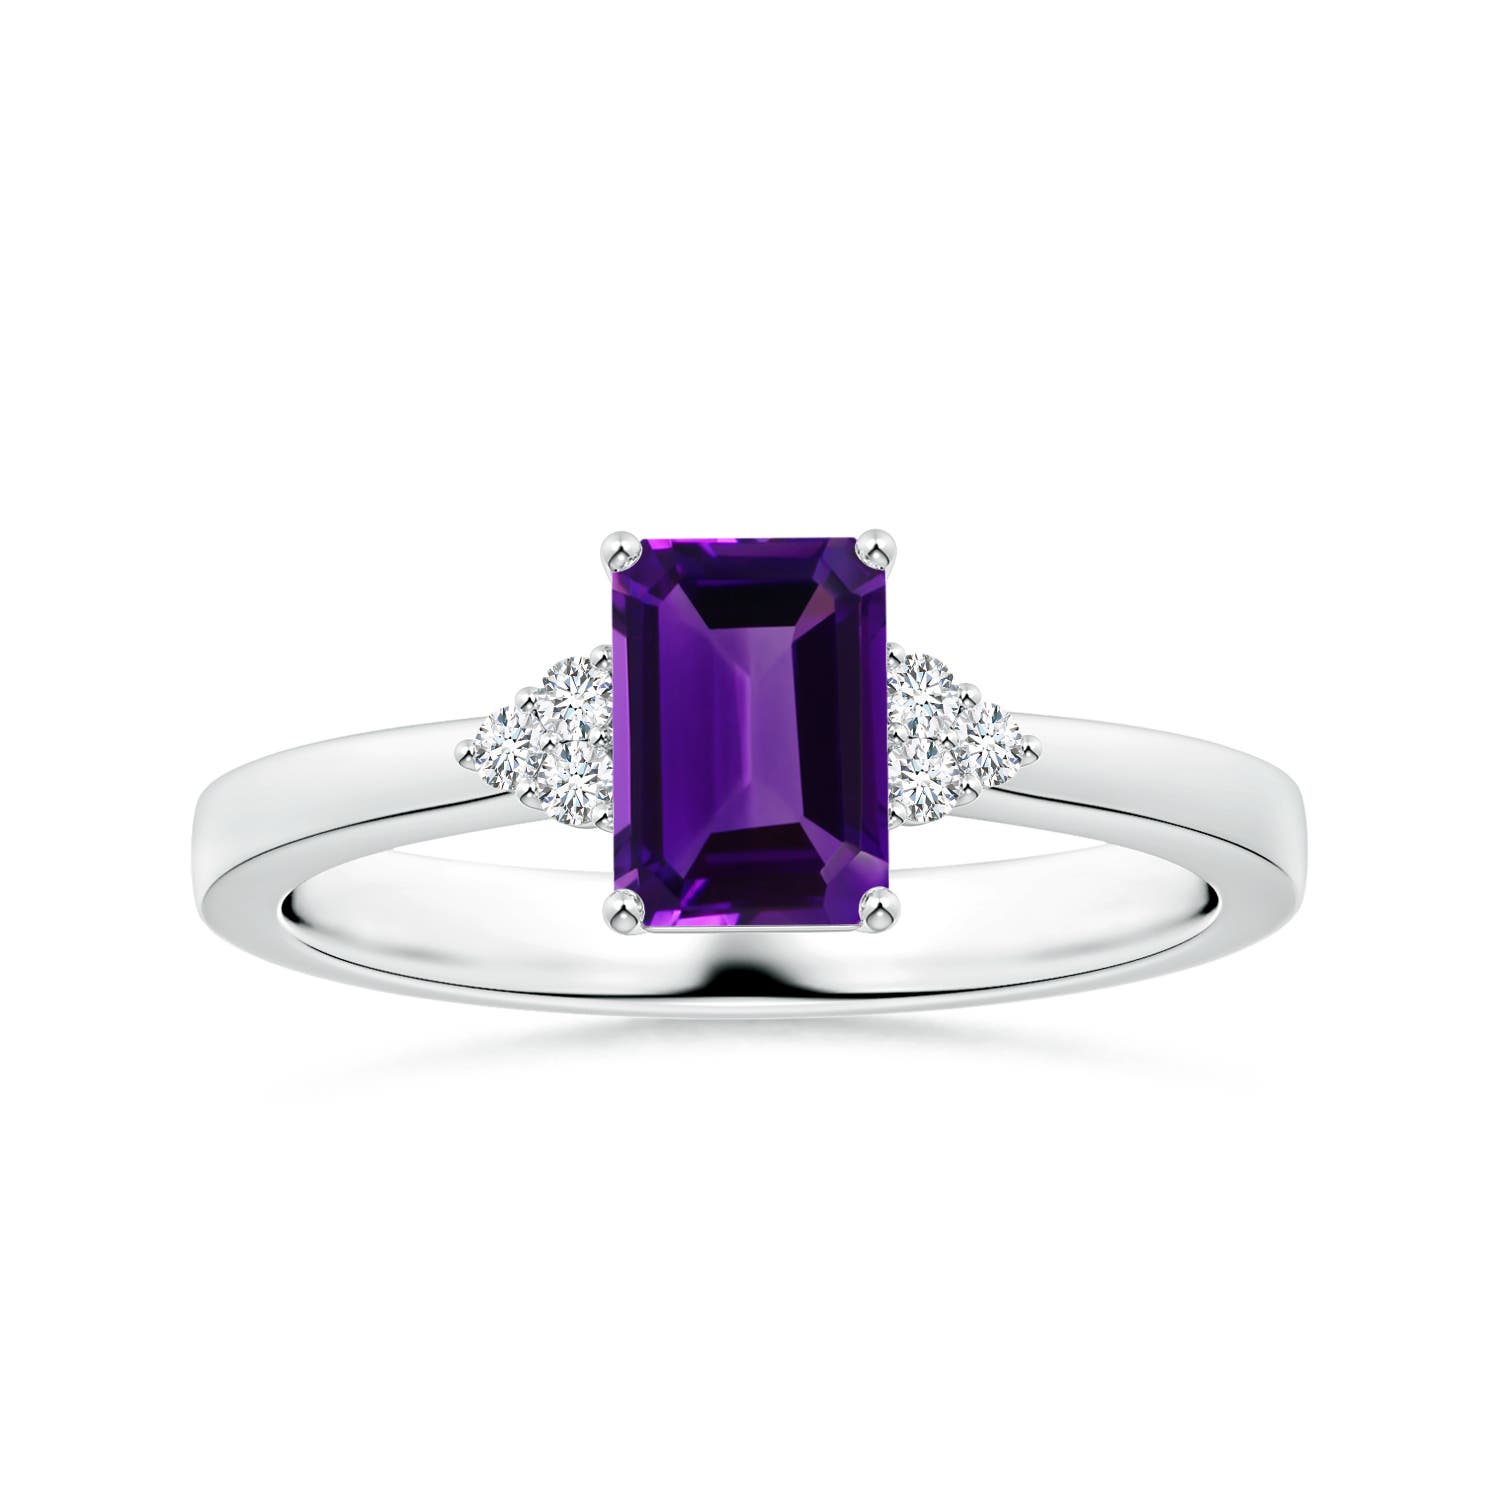 GIA Certified Emerald-Cut Amethyst Ring with Reverse Tapered Shank